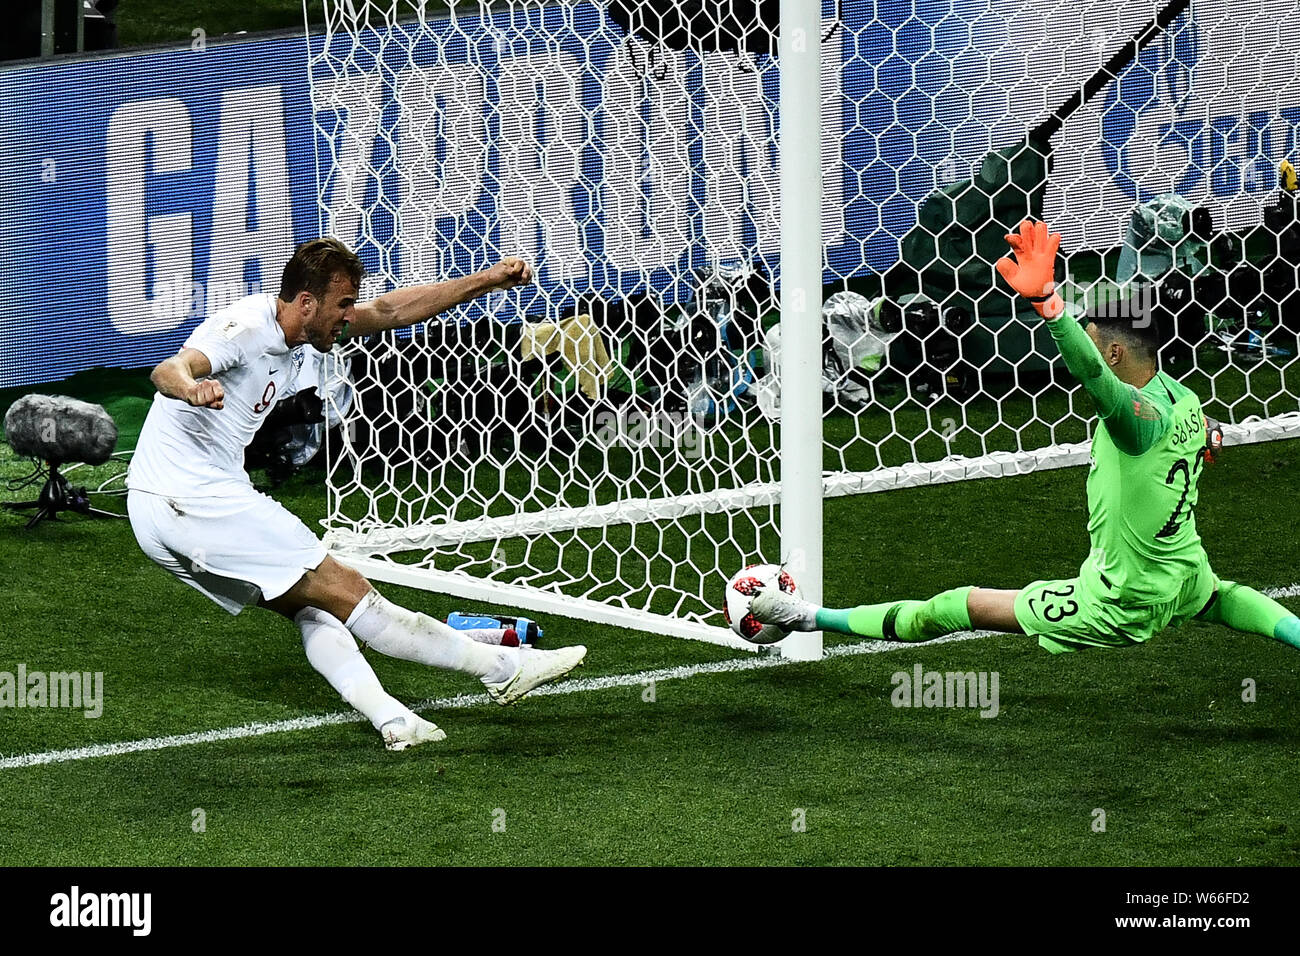 Goalkeeper Danijel Subasic of Croatia, right, tries to block a shot by Harry Kane of England in their semifinal match during the 2018 FIFA World Cup i Stock Photo